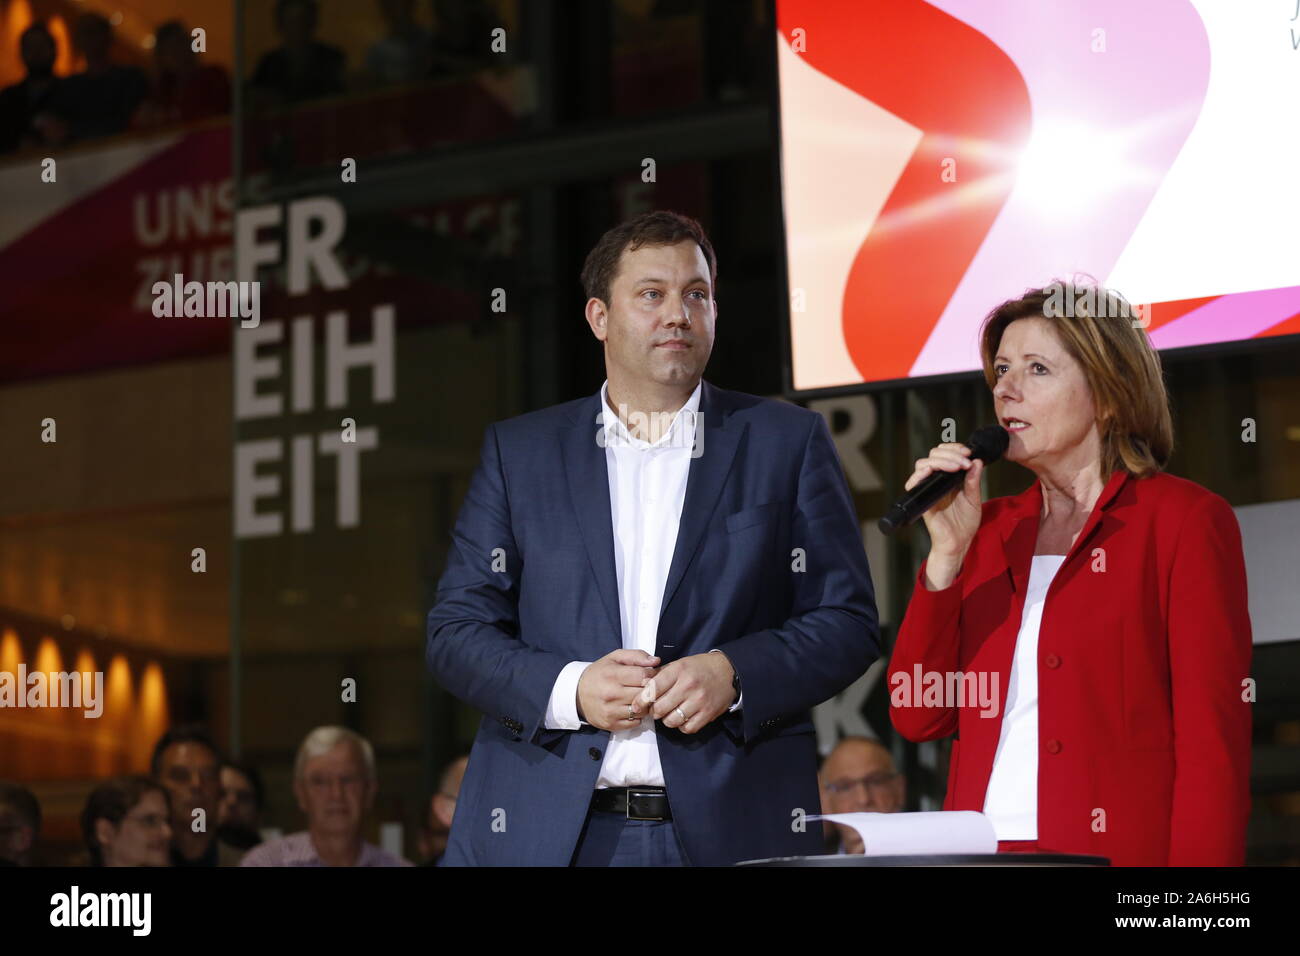 Berlin, Germany. 26th Oct, 2019. The SPD members elect Federal Finance Minister Olaf Scholz and Klara Geywitz just ahead of Norbert Walter-Borjans and Saskia Esken for the SPD presidency. The race for the SPD presidency goes into the runoff election in November: the two candidates will then be elected at the party congress. (Photo by Simone Kuhlmey/Pacific Press) Credit: Pacific Press Agency/Alamy Live News Stock Photo